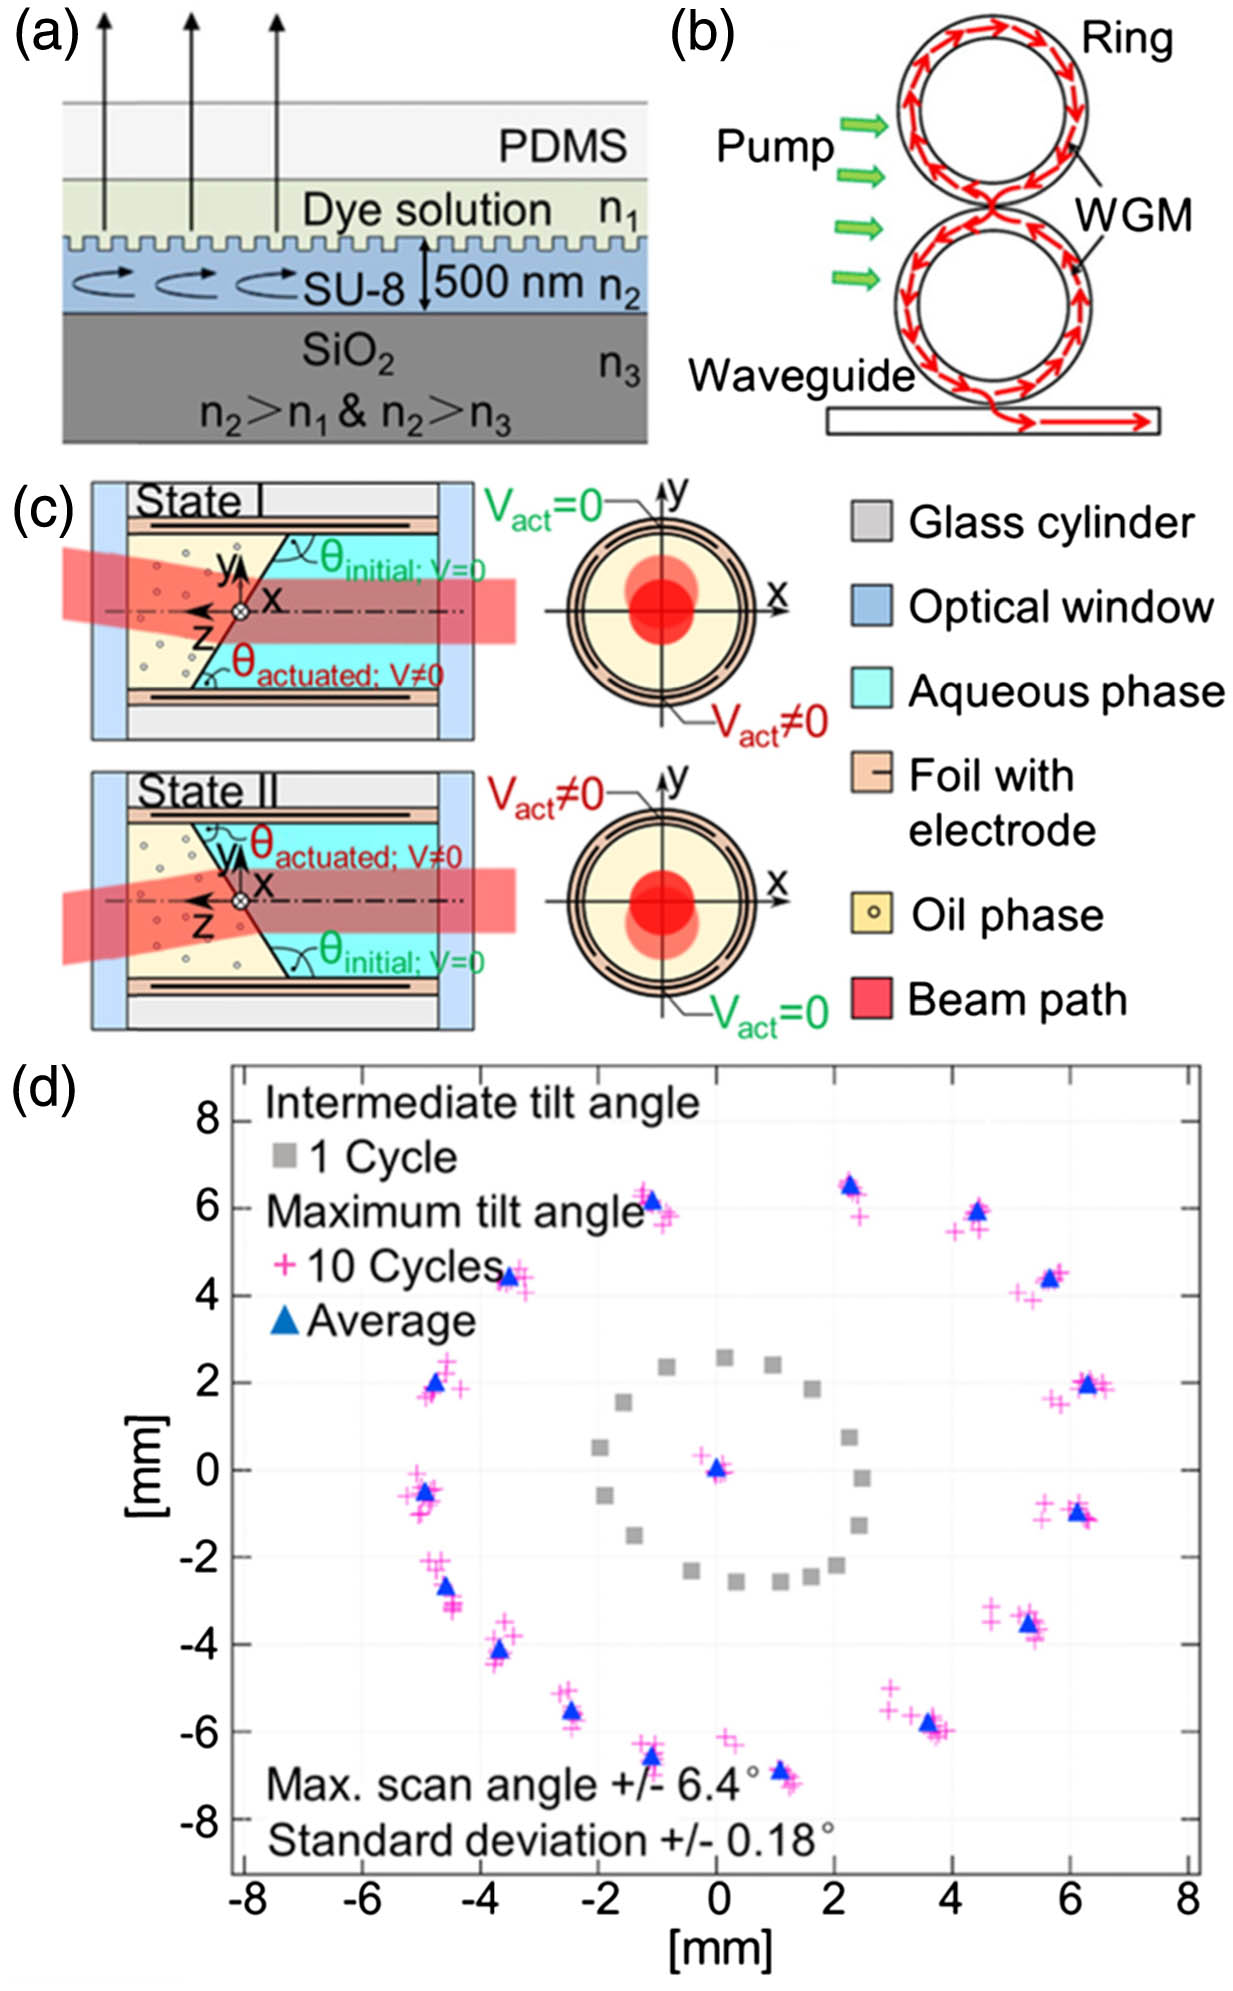 (a) DFB resonator-based optofluidic laser. (b) An optofluidic ring resonator laser. (c) A rotatable optofluidic prism with beam positions tuned by the electro-wetting effect. (d) Beam positions of the tunable prism for 10 repeated cycles. Maximum tilt angle (pink crosses), spatial average (blue triangles), and the smaller tilt angle (gray squares) are shown in the figure. (a) Reproduced with permission [22], Copyright 2009, American Institute of Physics. (b) Reproduced with permission [24], Copyright 2011, American Institute of Physics. (c), (d) Reproduced with permission [29], Copyright 2016, Optical Society of America.